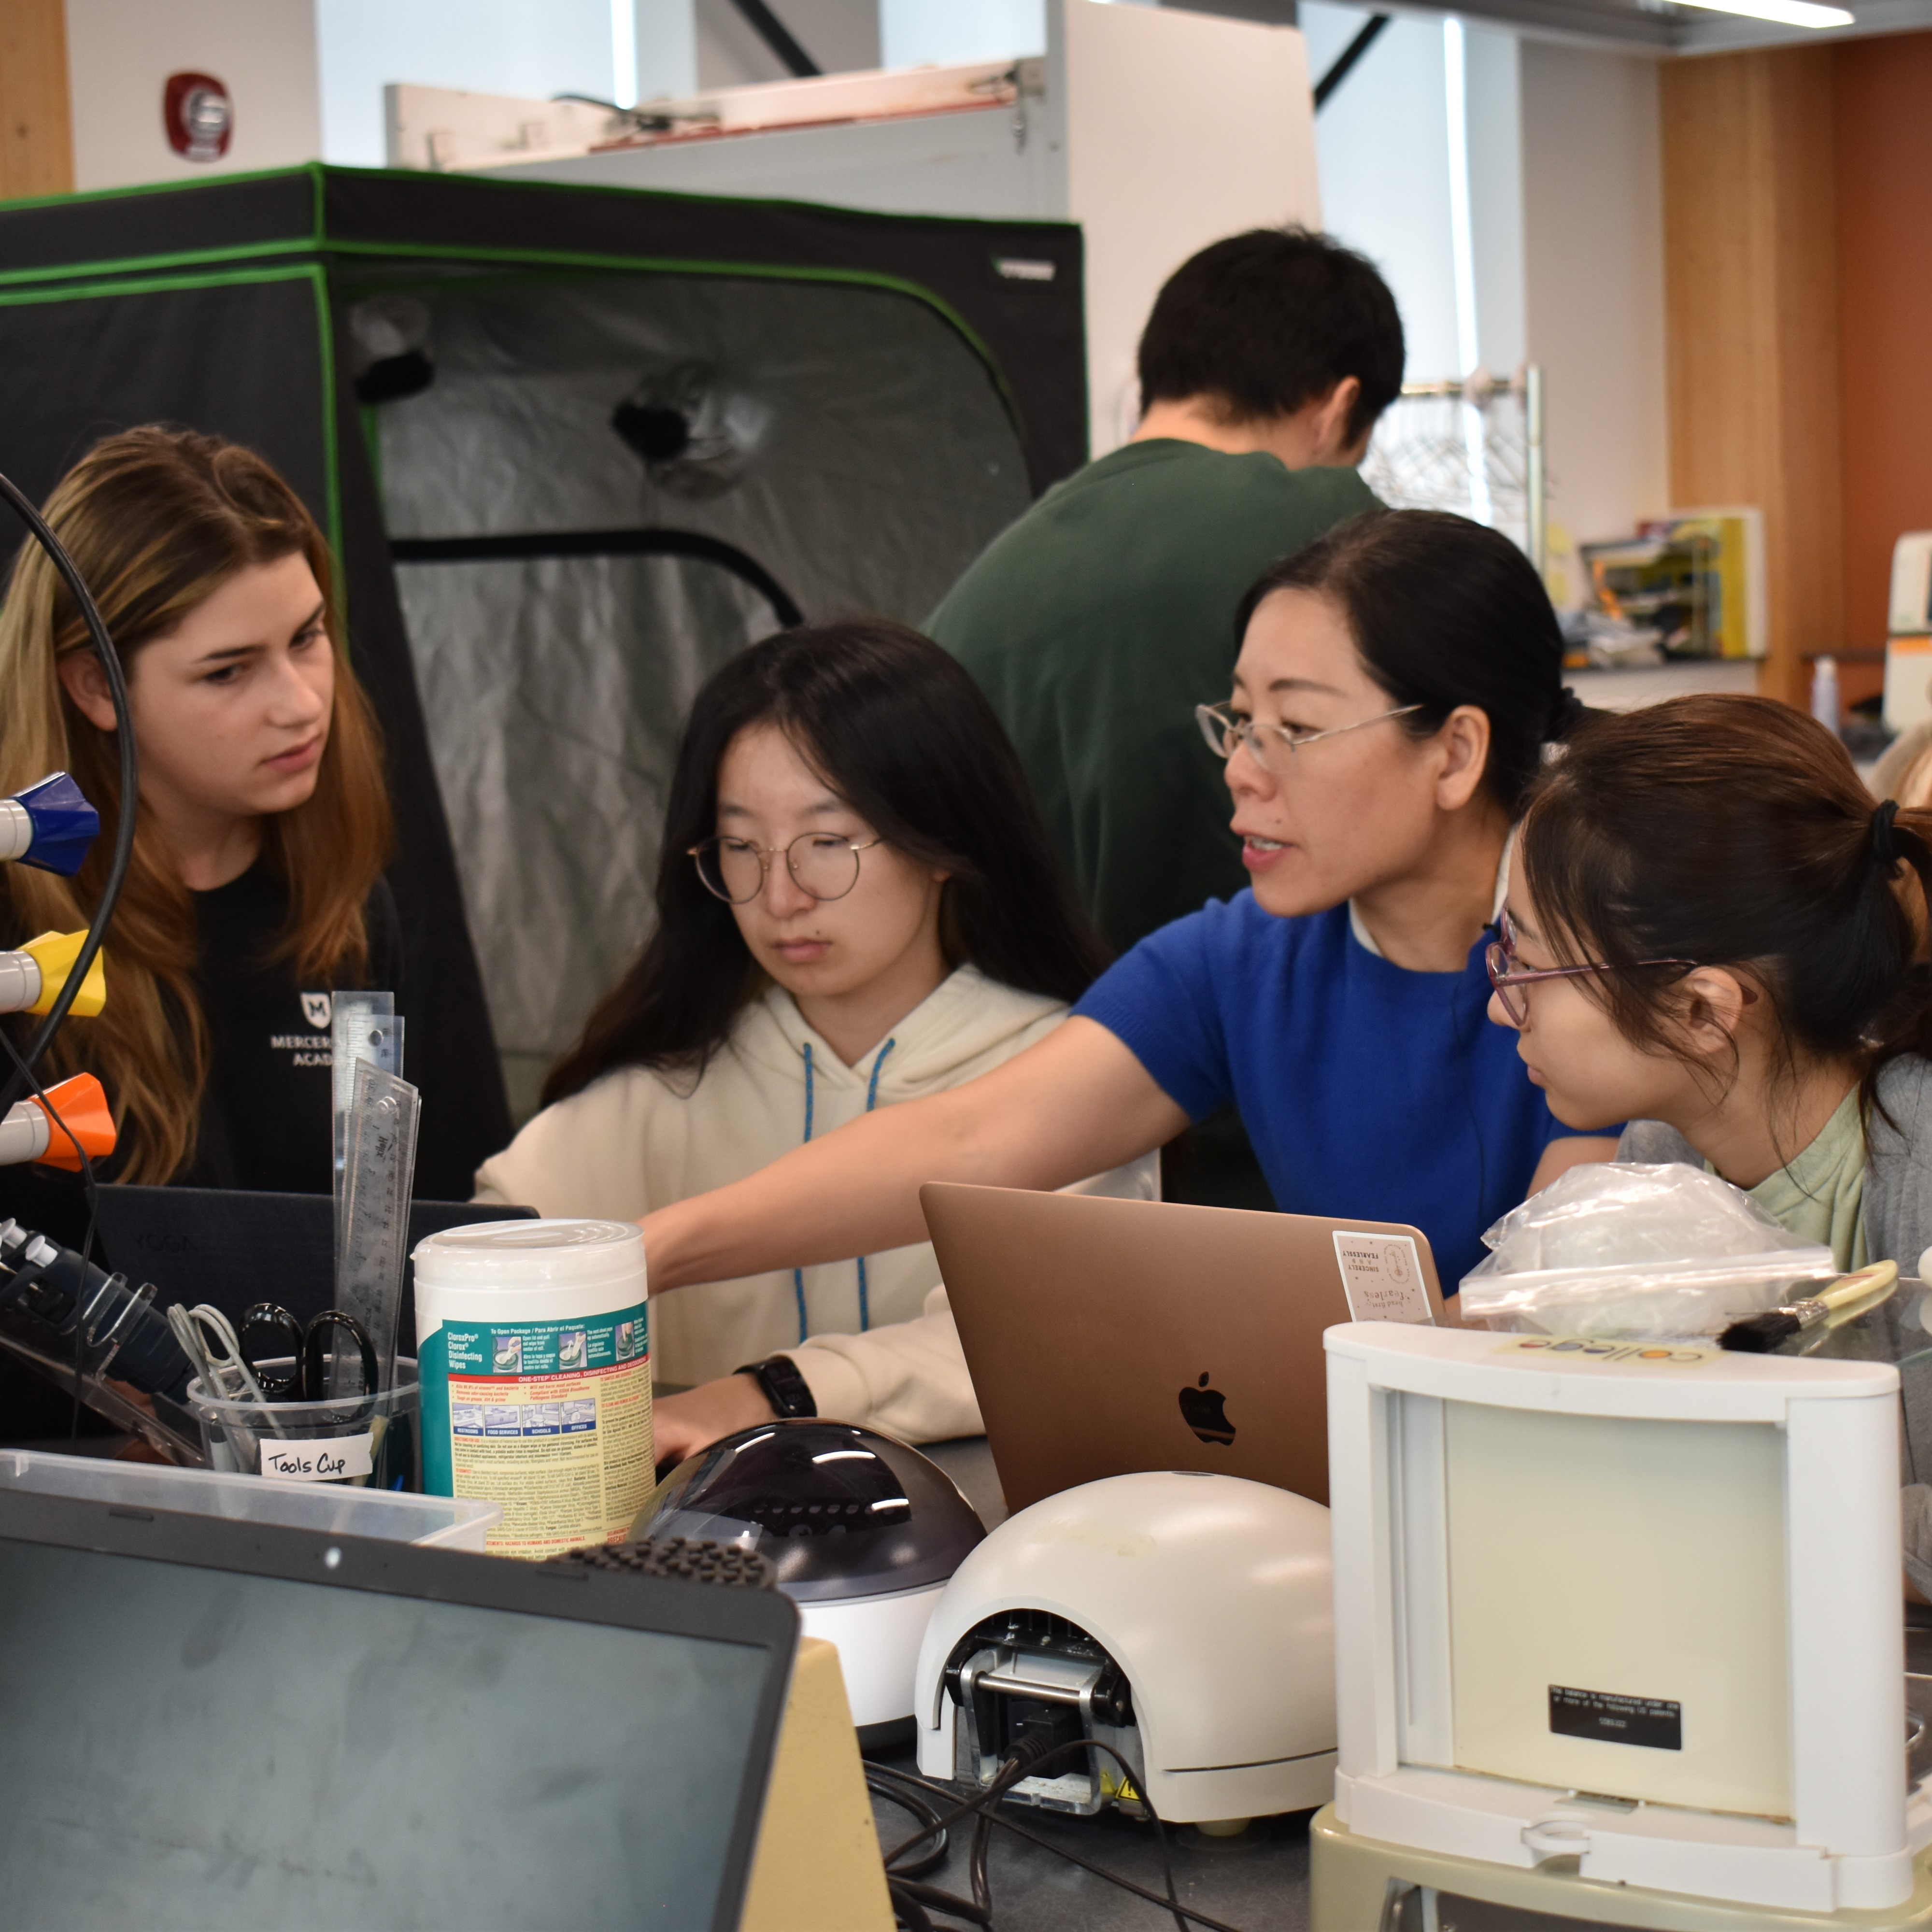 Four women look at computers in a lab